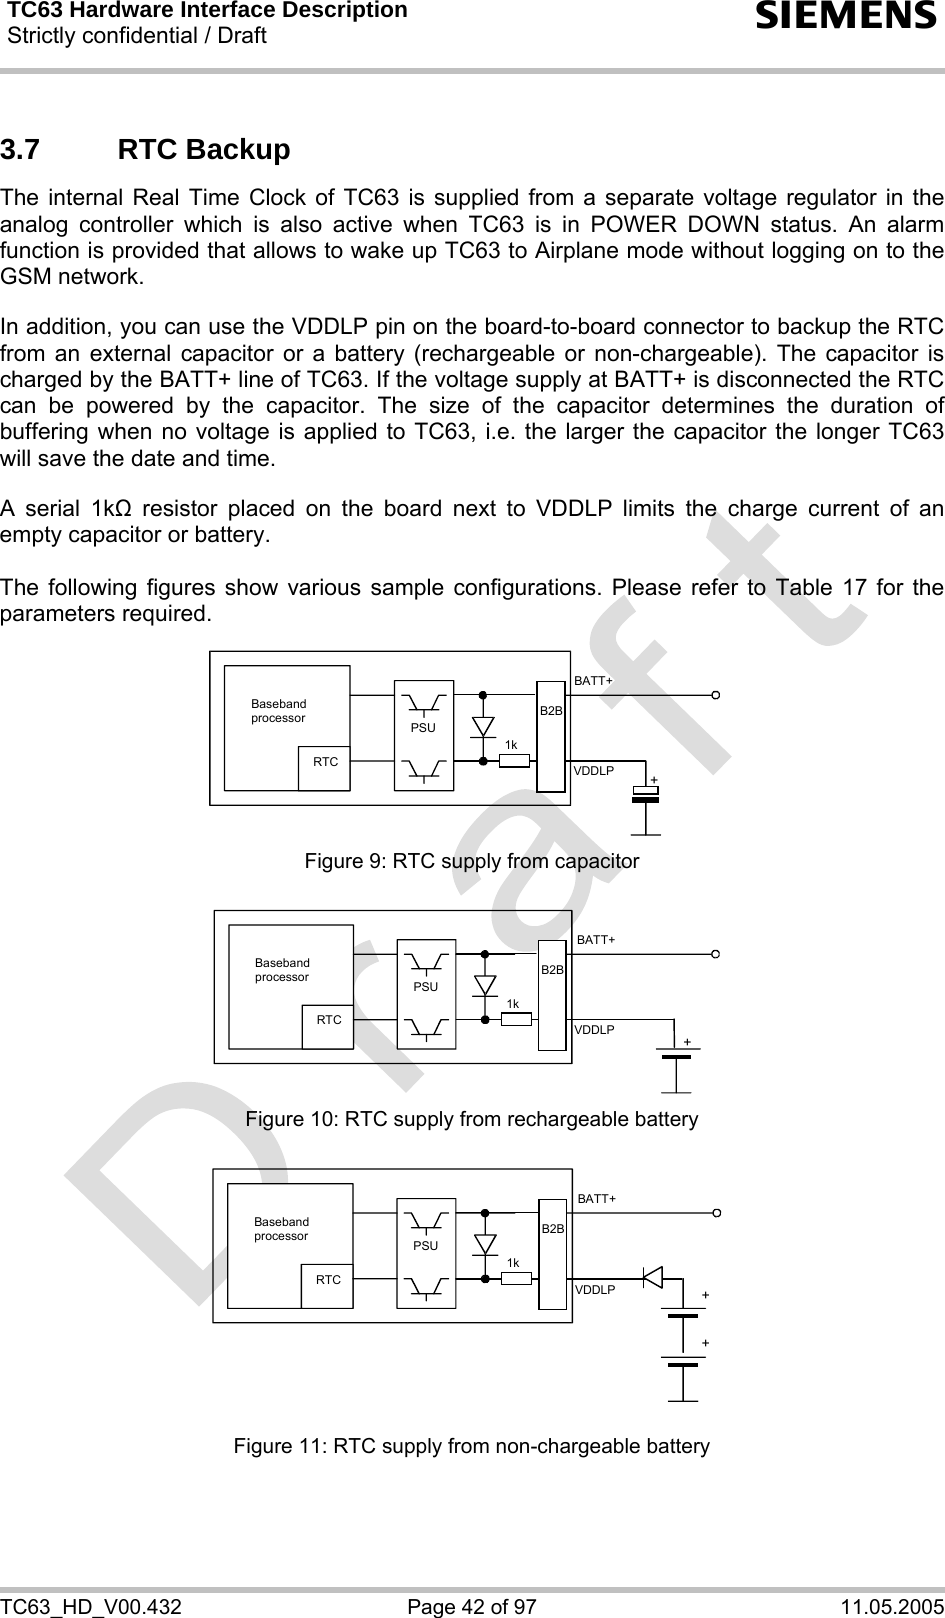 TC63 Hardware Interface Description Strictly confidential / Draft  s TC63_HD_V00.432  Page 42 of 97  11.05.2005 3.7 RTC Backup The internal Real Time Clock of TC63 is supplied from a separate voltage regulator in the analog controller which is also active when TC63 is in POWER DOWN status. An alarm function is provided that allows to wake up TC63 to Airplane mode without logging on to the GSM network.   In addition, you can use the VDDLP pin on the board-to-board connector to backup the RTC from an external capacitor or a battery (rechargeable or non-chargeable). The capacitor is charged by the BATT+ line of TC63. If the voltage supply at BATT+ is disconnected the RTC can be powered by the capacitor. The size of the capacitor determines the duration of buffering when no voltage is applied to TC63, i.e. the larger the capacitor the longer TC63 will save the date and time.   A serial 1k resistor placed on the board next to VDDLP limits the charge current of an empty capacitor or battery.   The following figures show various sample configurations. Please refer to Table 17 for the parameters required.    Baseband processor RTC PSU+BATT+ 1kB2BVDDLP Figure 9: RTC supply from capacitor   RTC +BATT+ 1kB2BVDDLPBaseband processor PSU Figure 10: RTC supply from rechargeable battery   RTC ++BATT+ 1kVDDLPB2BBaseband processor PSU Figure 11: RTC supply from non-chargeable battery 